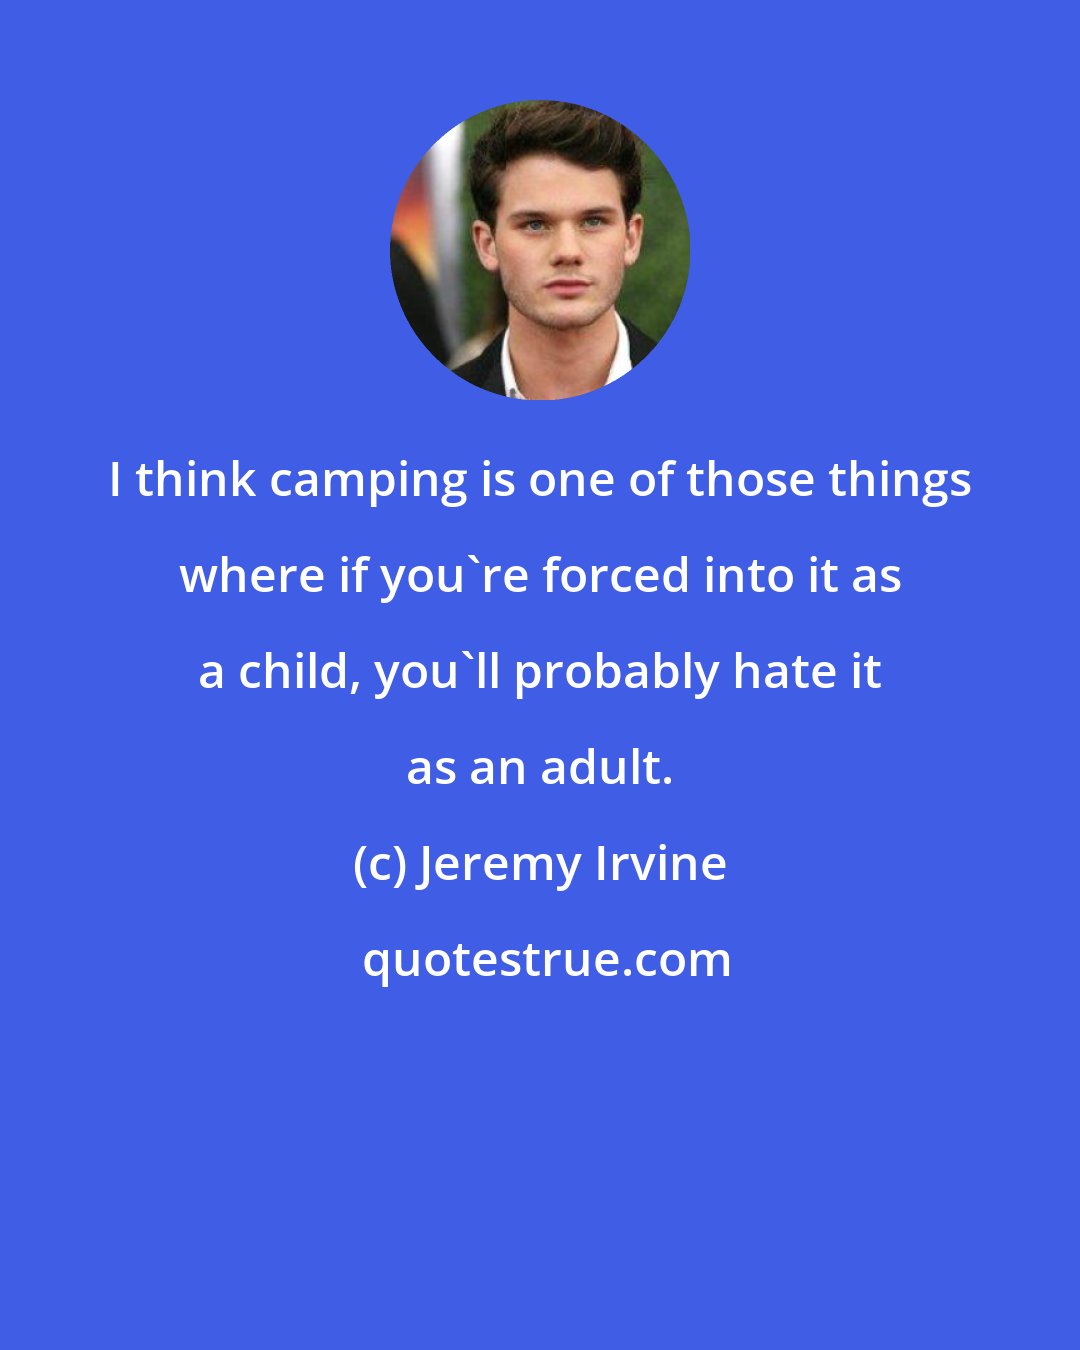 Jeremy Irvine: I think camping is one of those things where if you're forced into it as a child, you'll probably hate it as an adult.